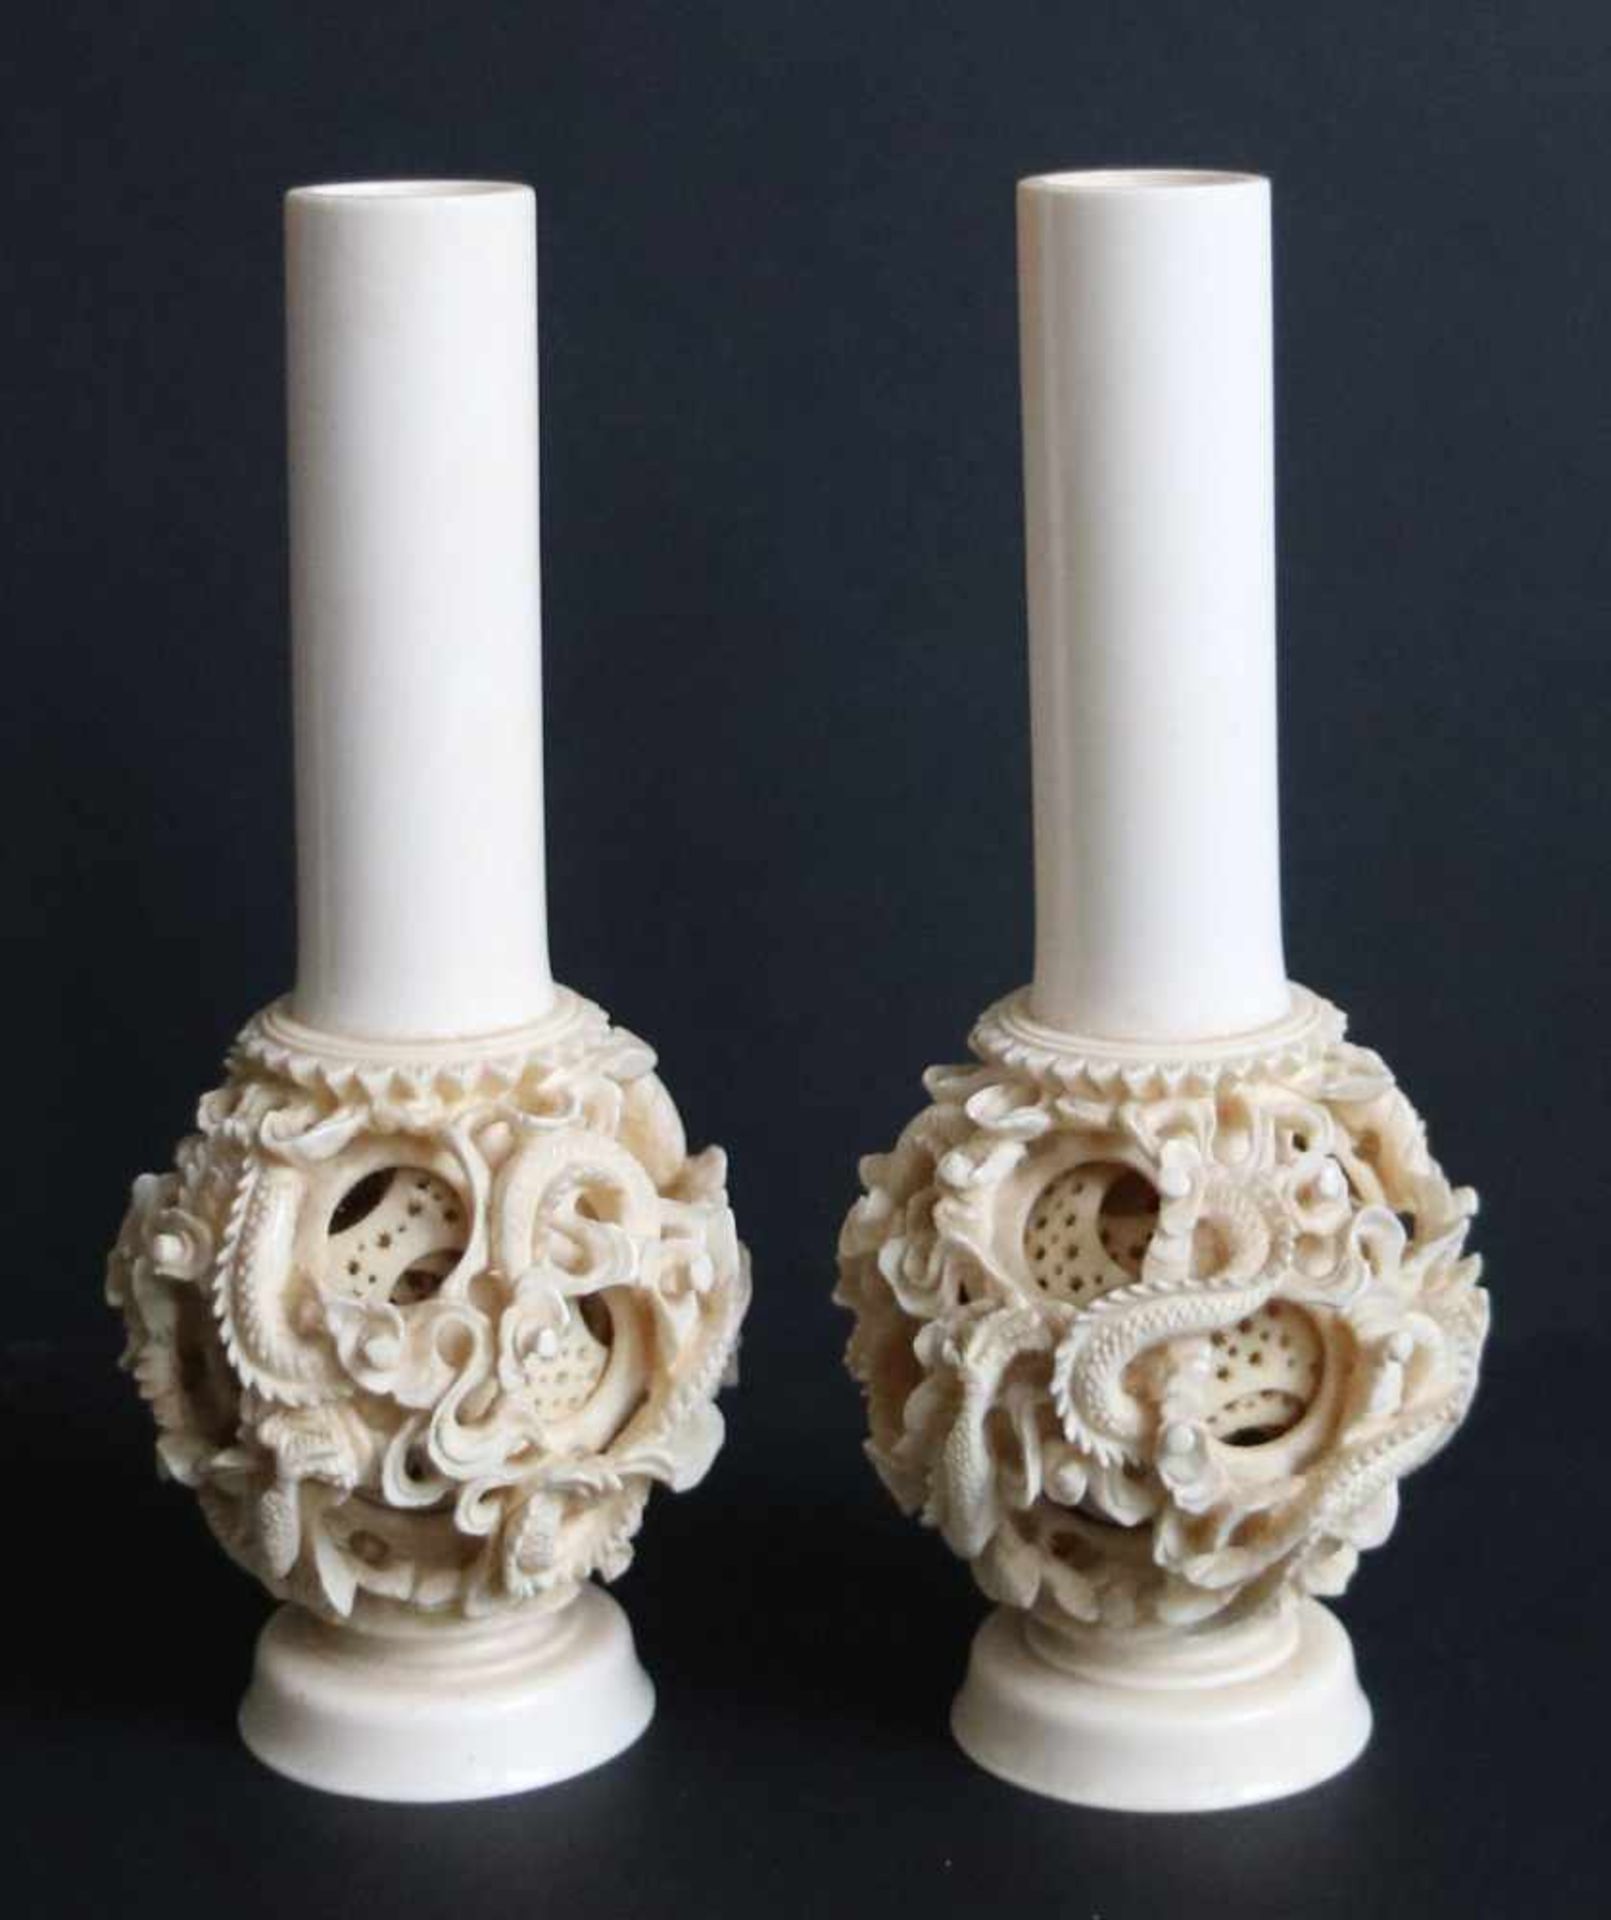 2 Chinese candlesticks with puzzle ball1920 Certificate of Arts Ivory ExpertsH 15.5 cm